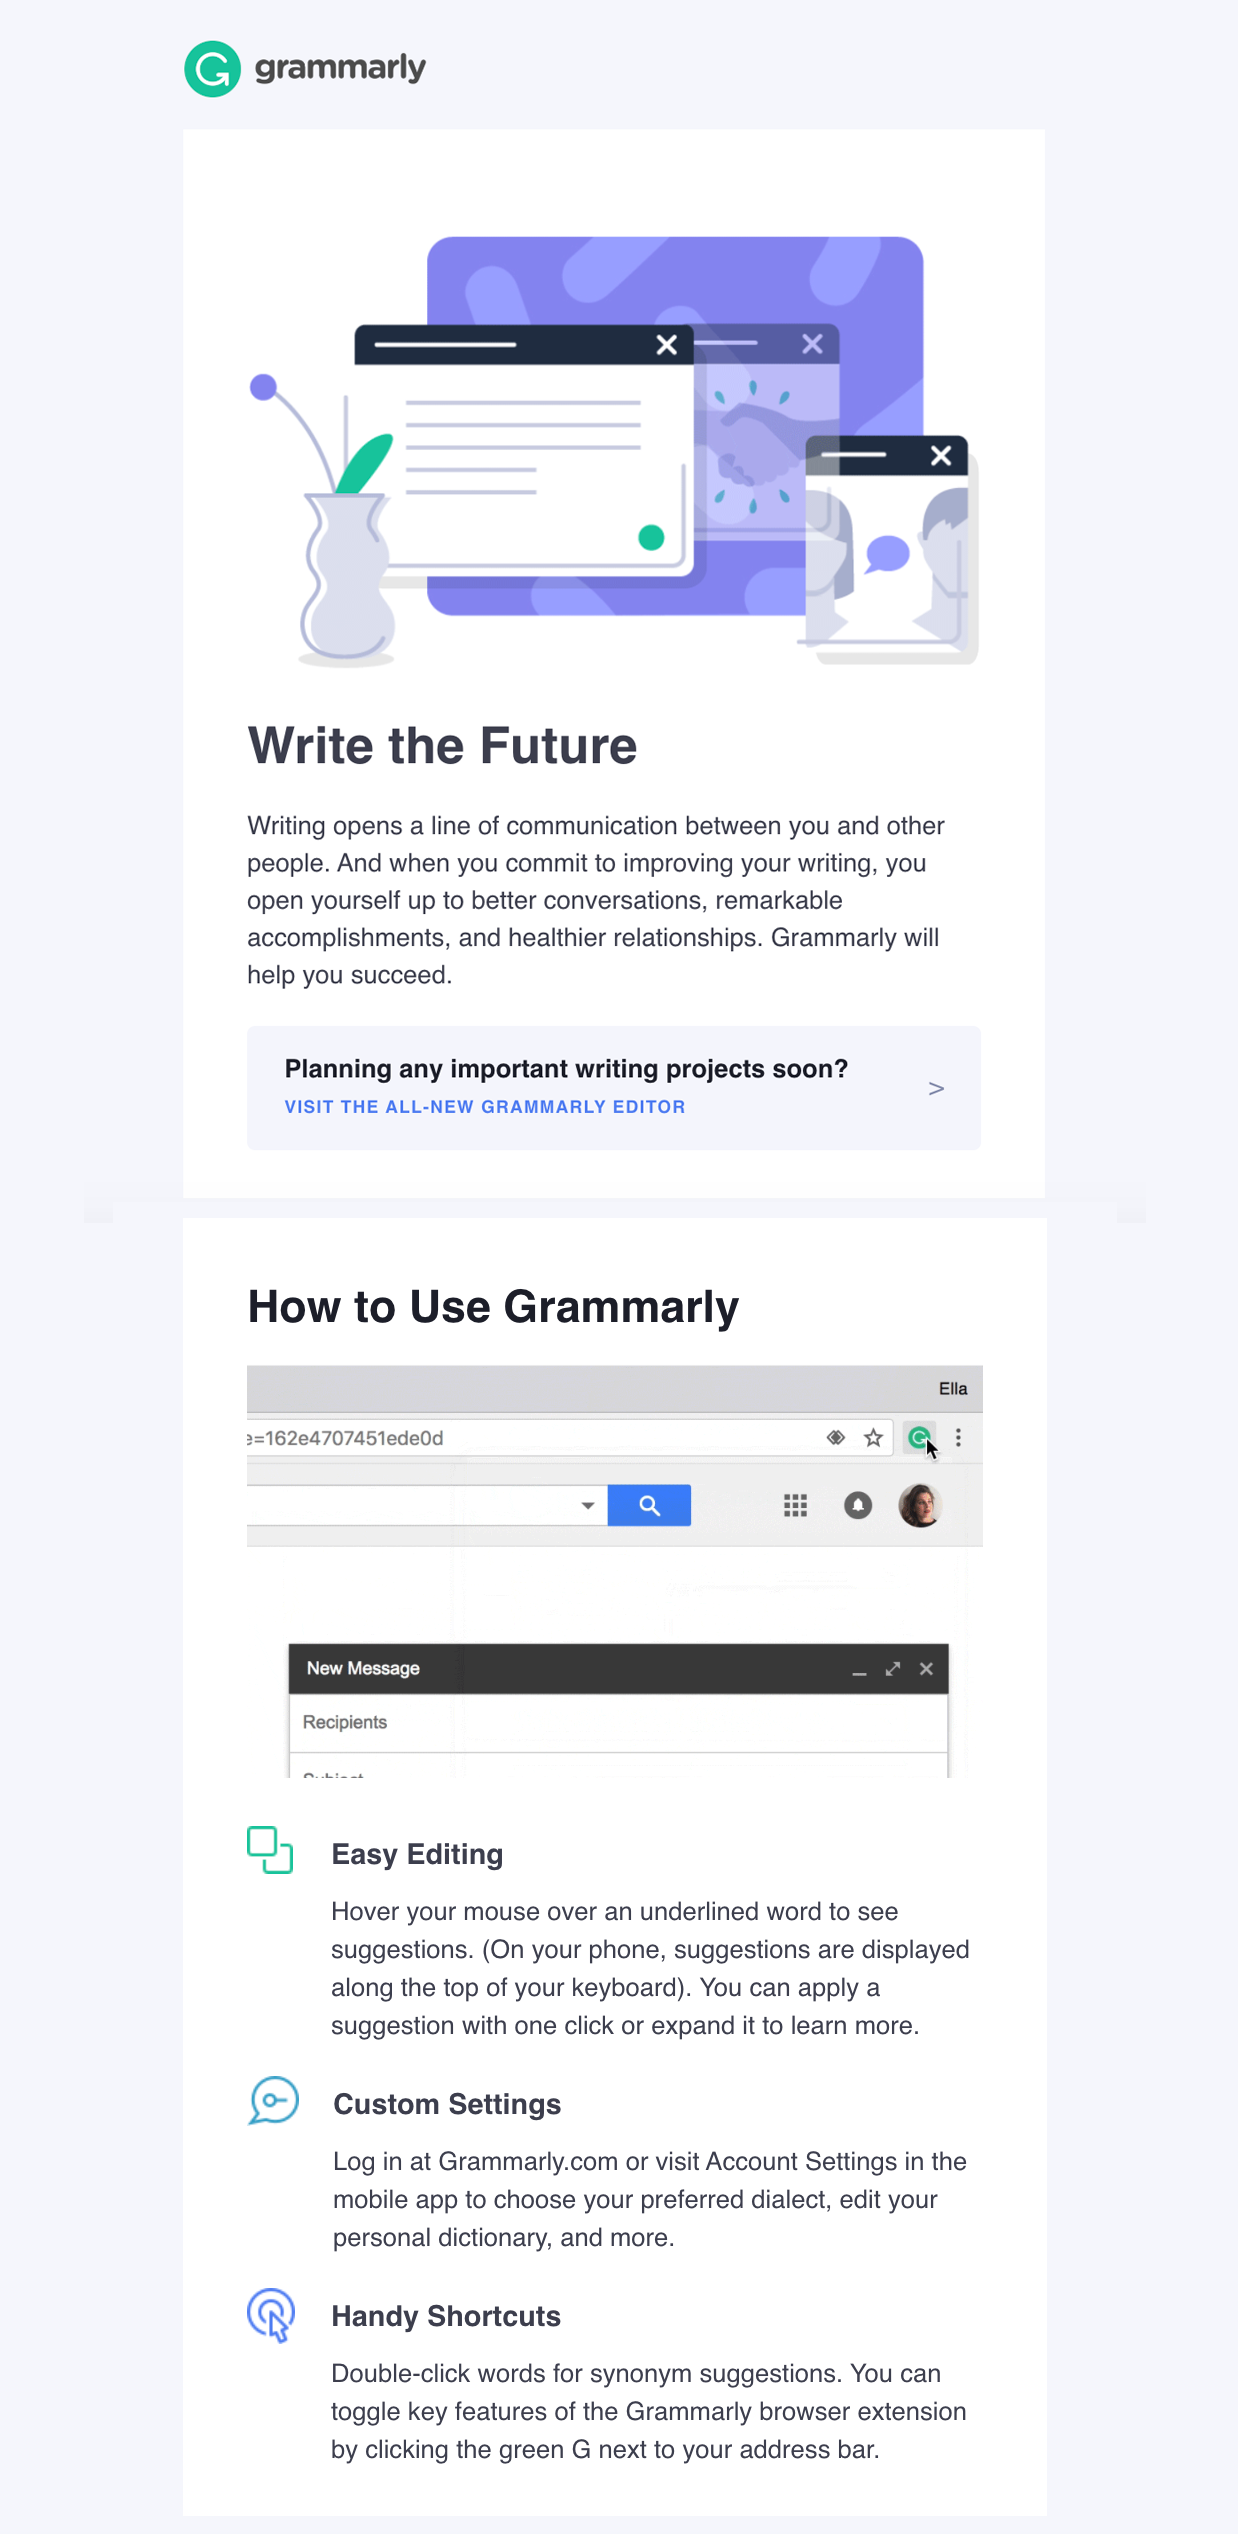 Welcome email - a good example from Grammarly